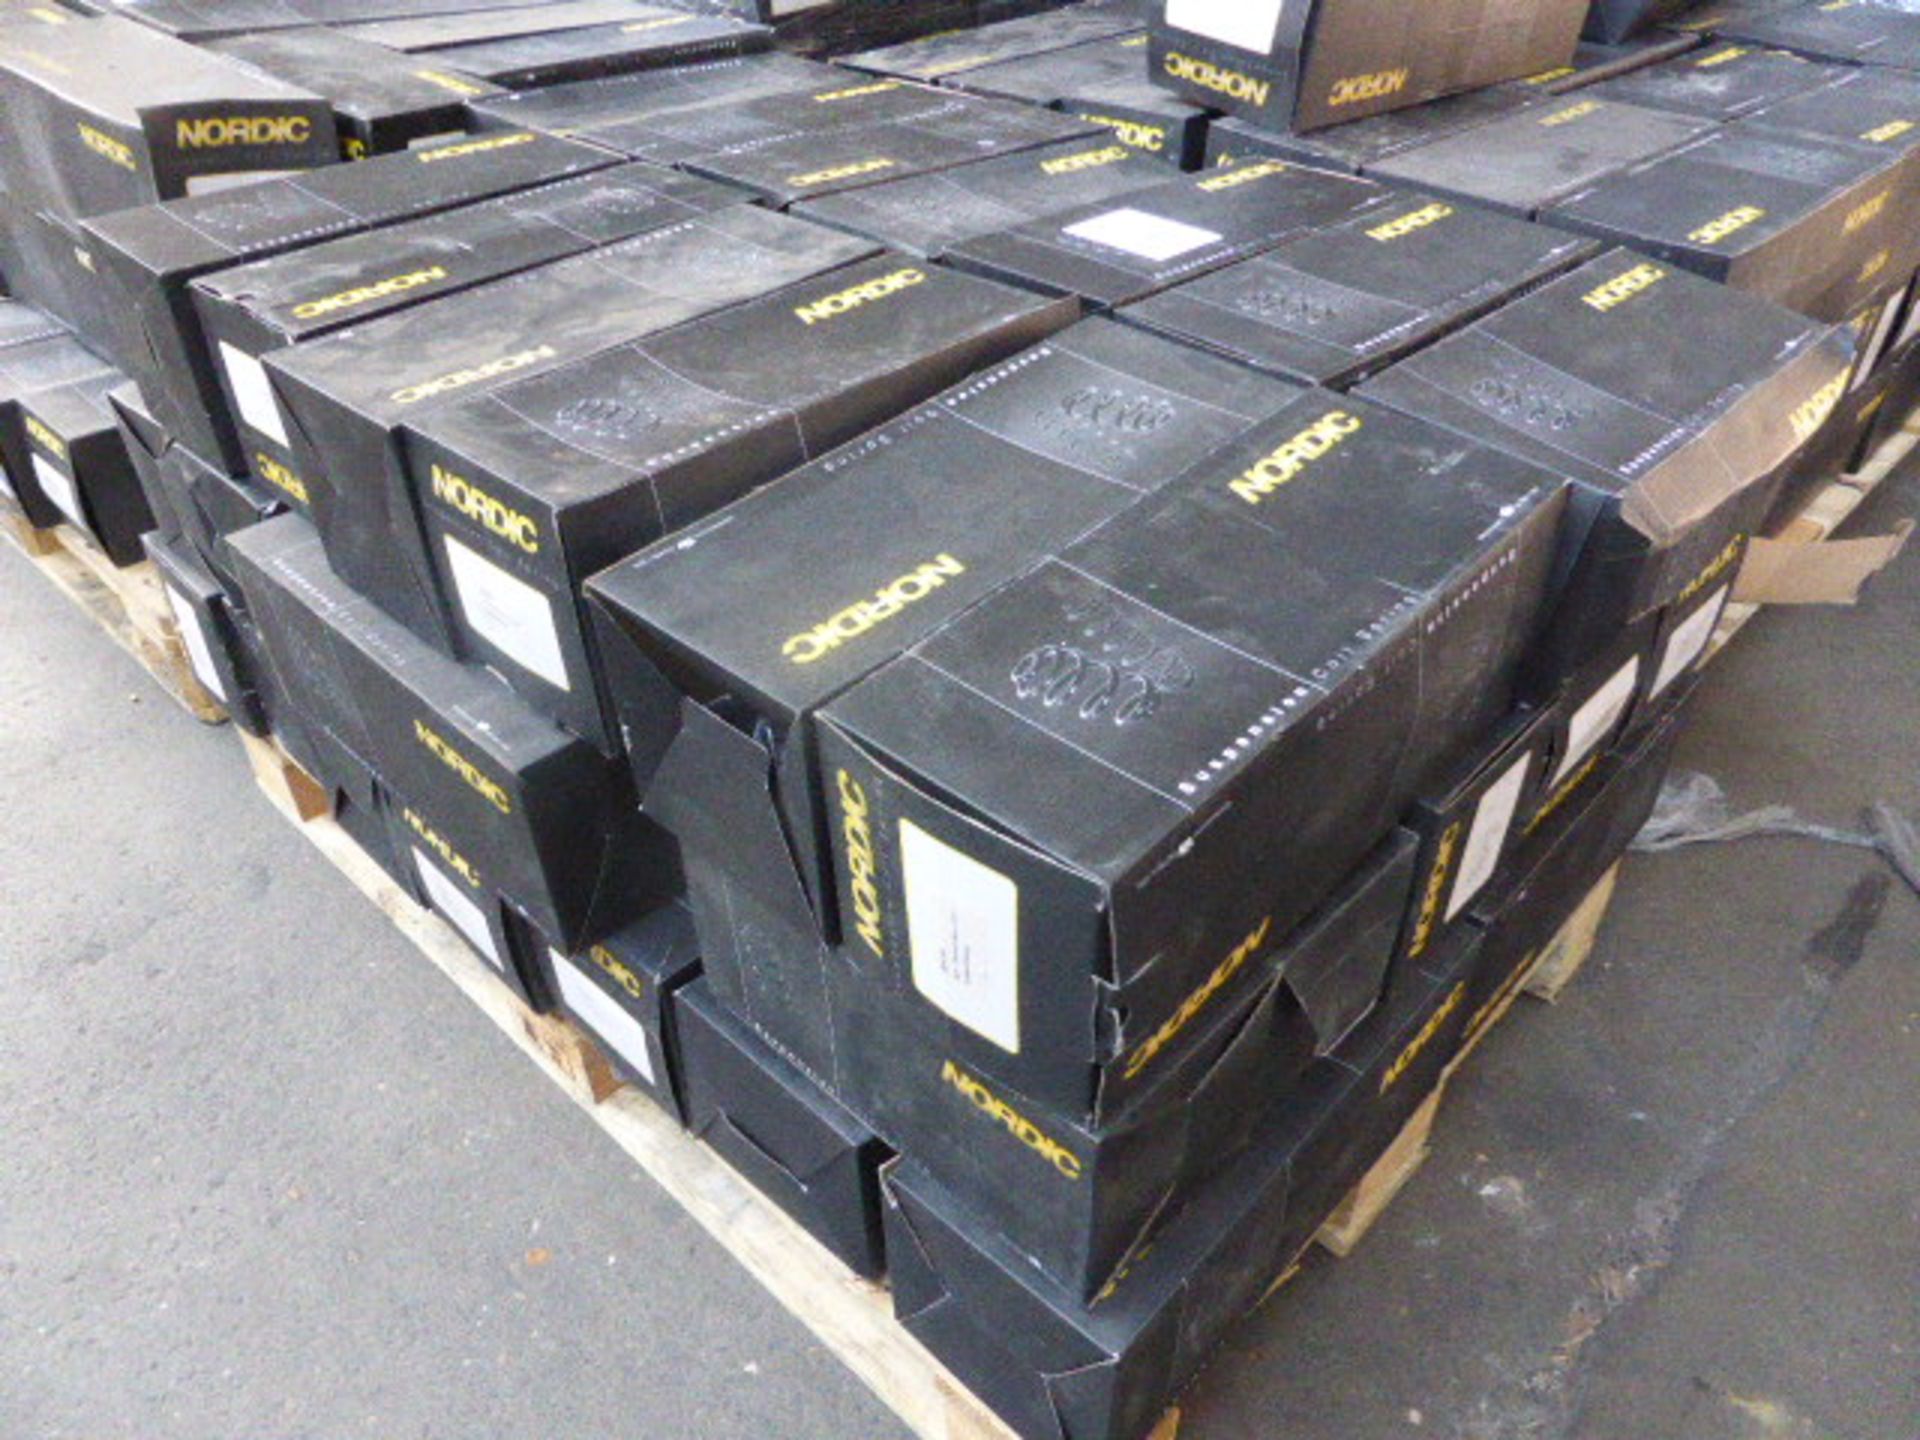 Pallet of Nordic suspension coil springs, for vehicles including Vauxhall, Renault, Ford, etc